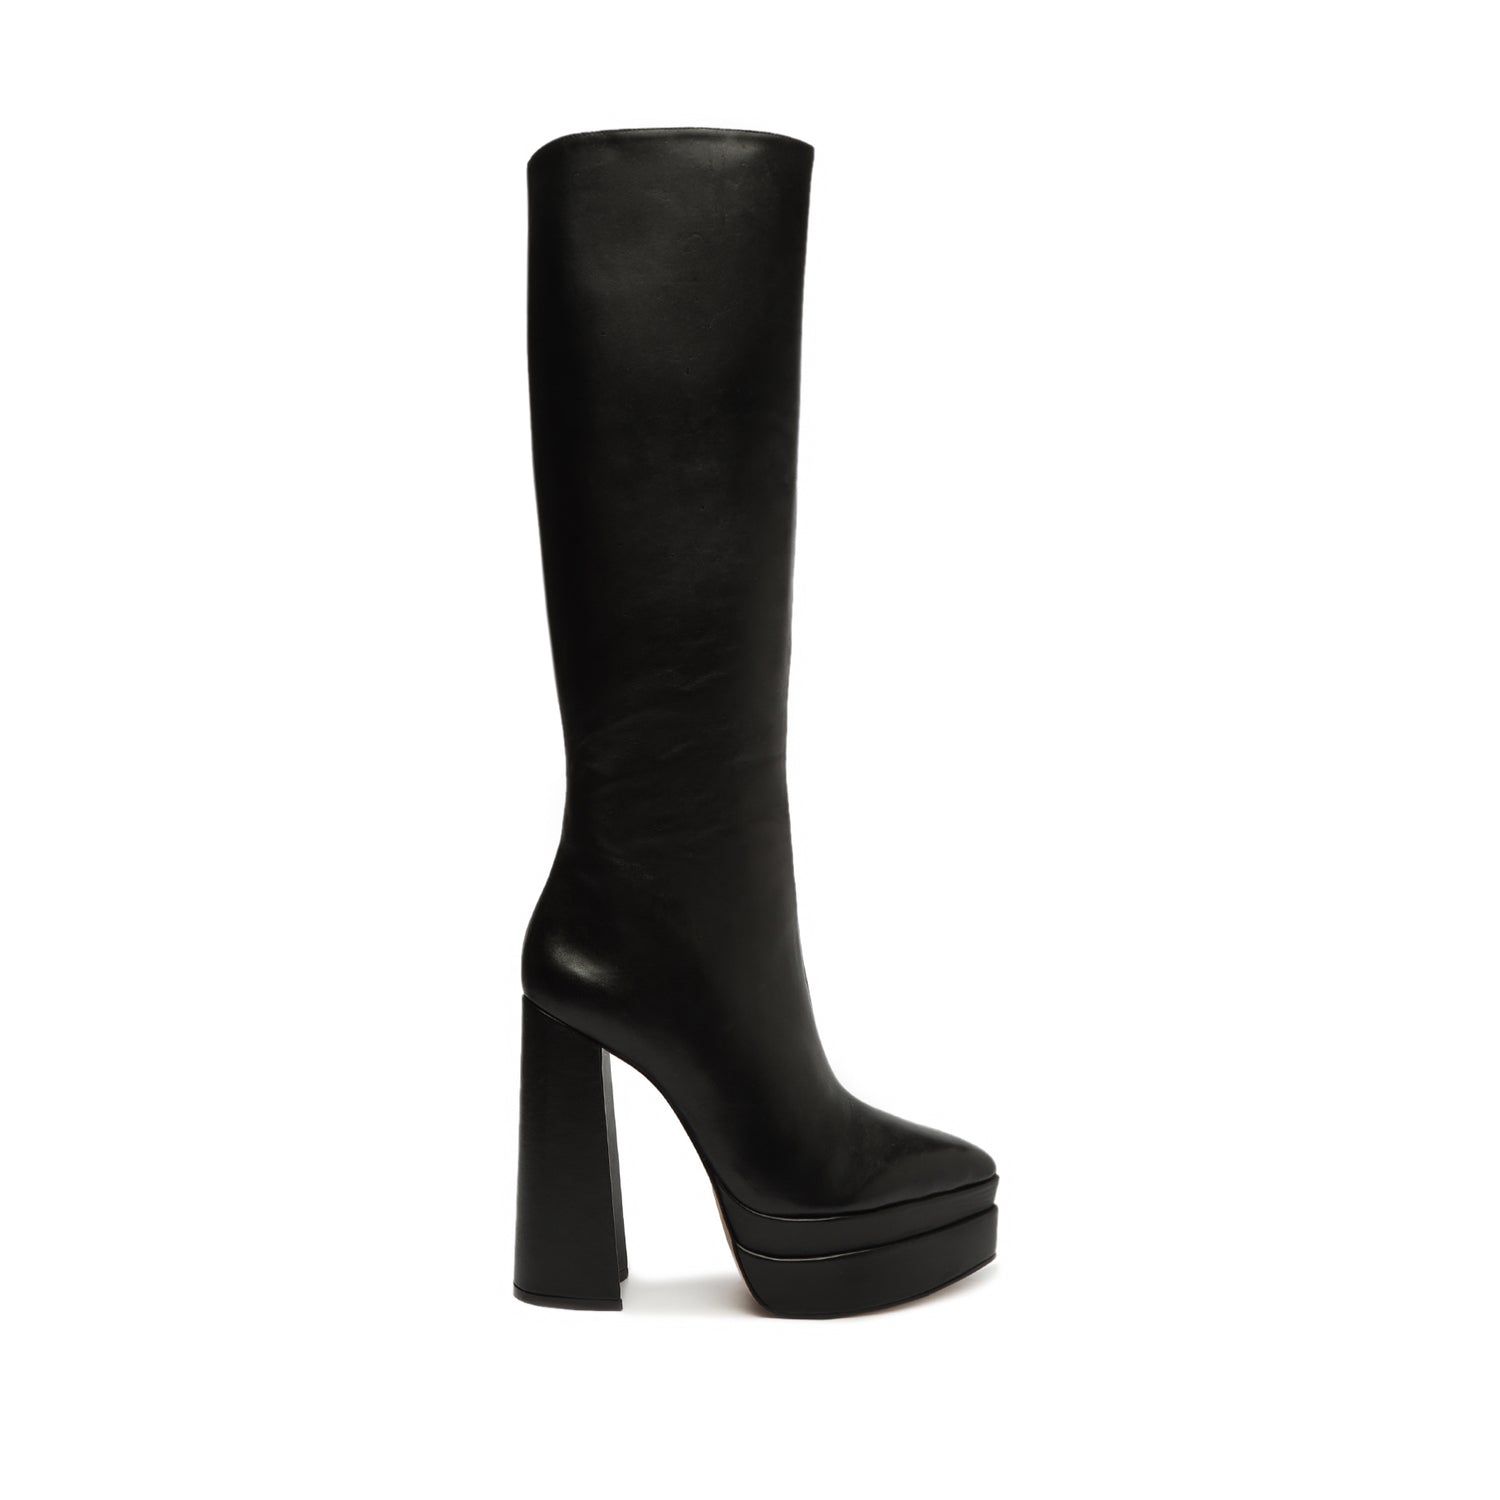 Elysee Up Boot Boots FALL 23 5 Black Atanado Leather - Schutz Shoes